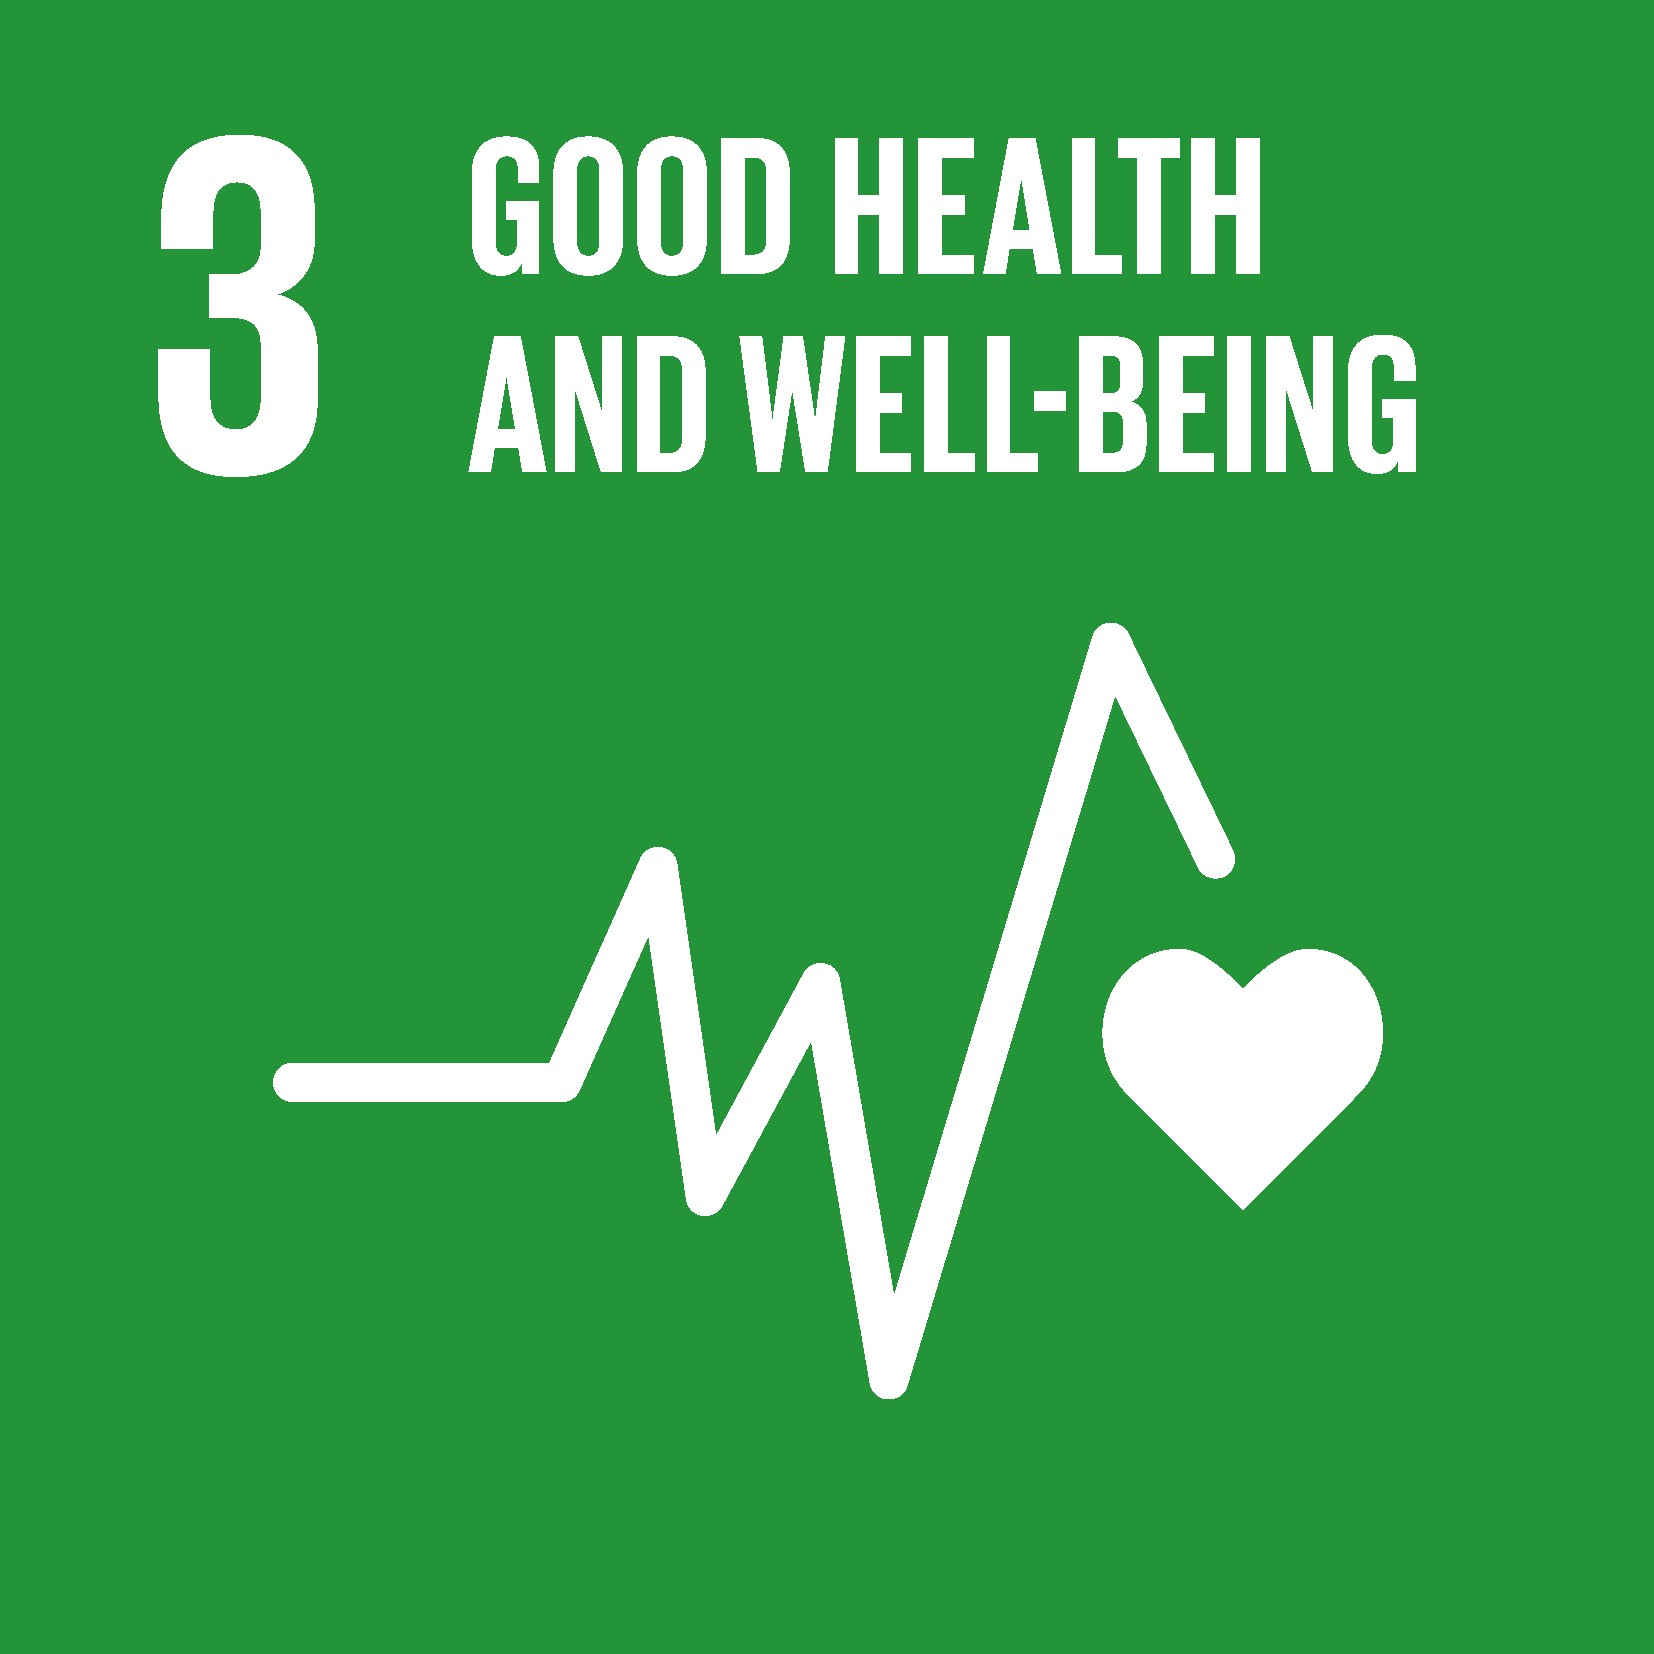 The Global Goal 3 Good health and well-being